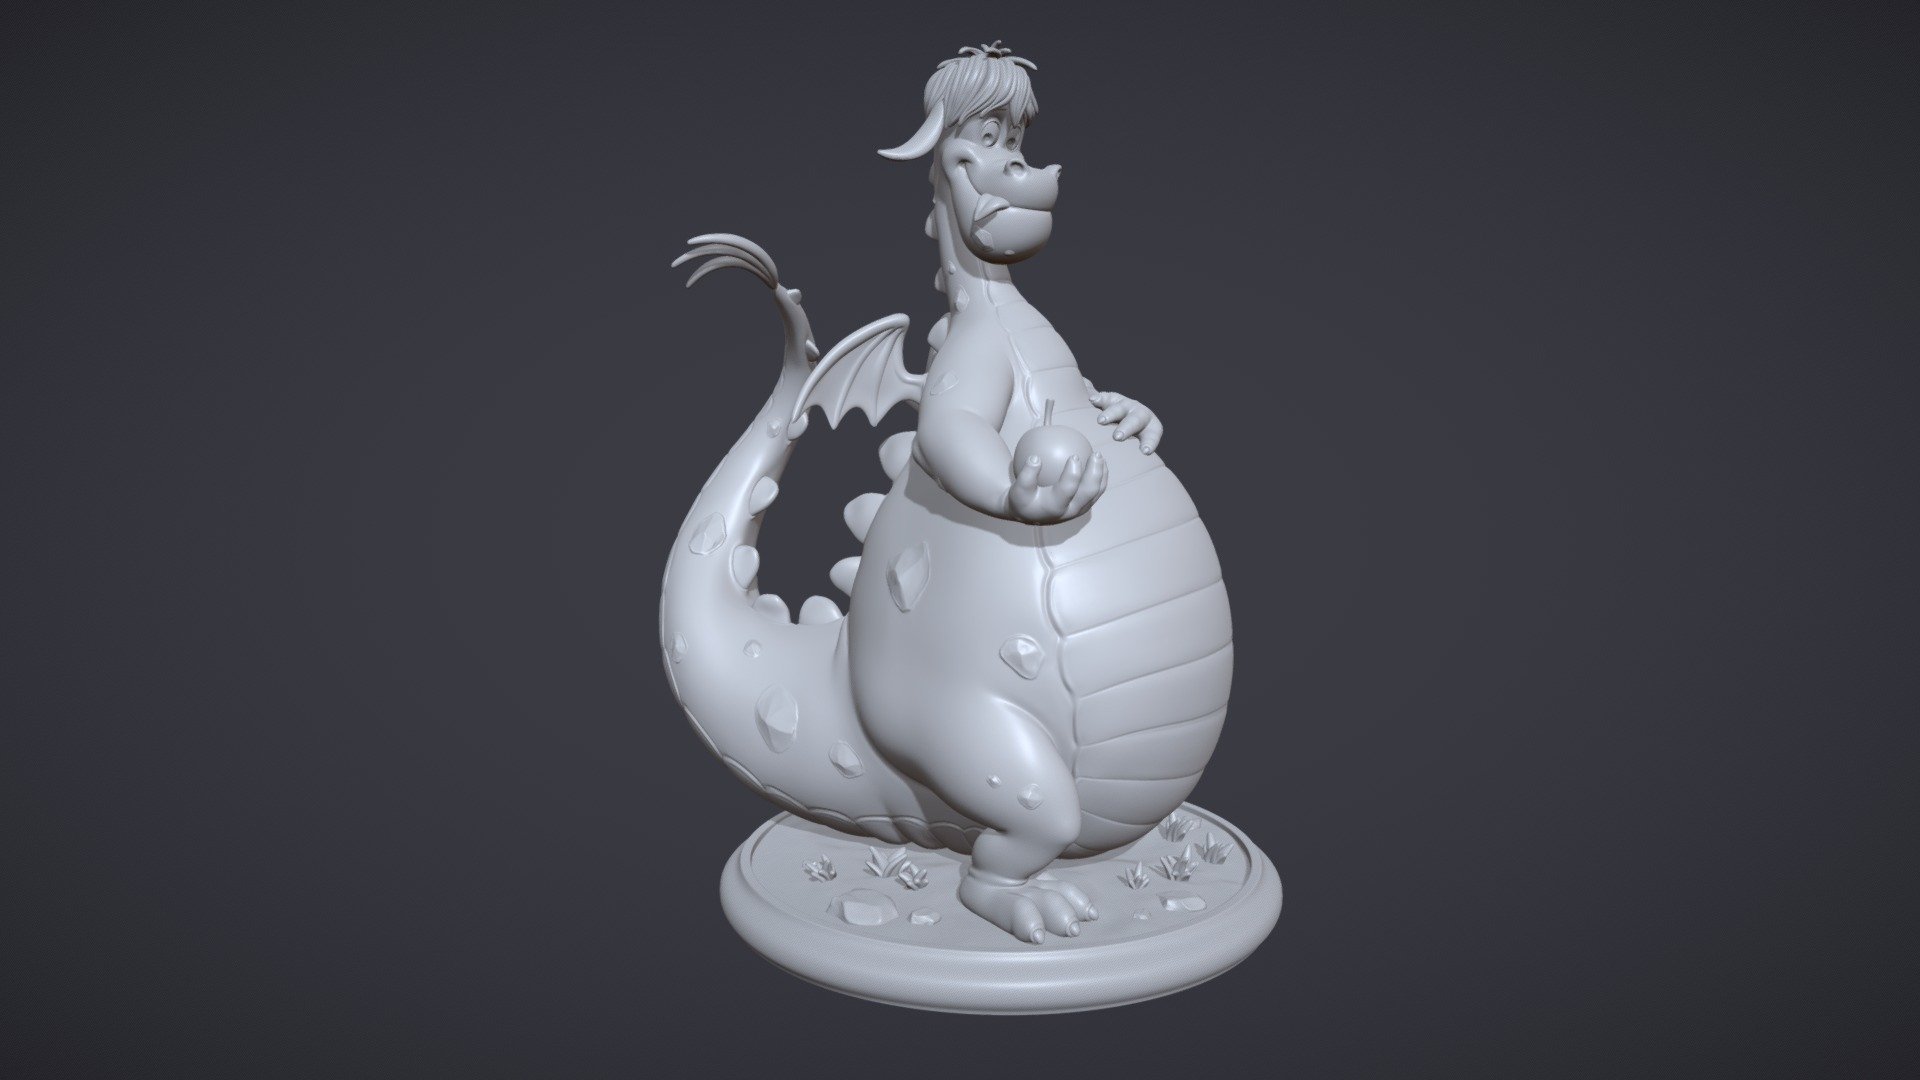 With this purchase you will get a digital version of a highly detailed Elliott the Dragon sculpture inspired by the Disney character from Pete's Dragon. Prepared and tested for optimal and efficient 3d printing. Separated and keyed into 2 pieces (base and body).

Default scale is: 160 mm.

The file is available in .OBJ .FBX and .STL format.

Enjoy! - Elliott the Dragon - Buy Royalty Free 3D model by sr_Models 3d model